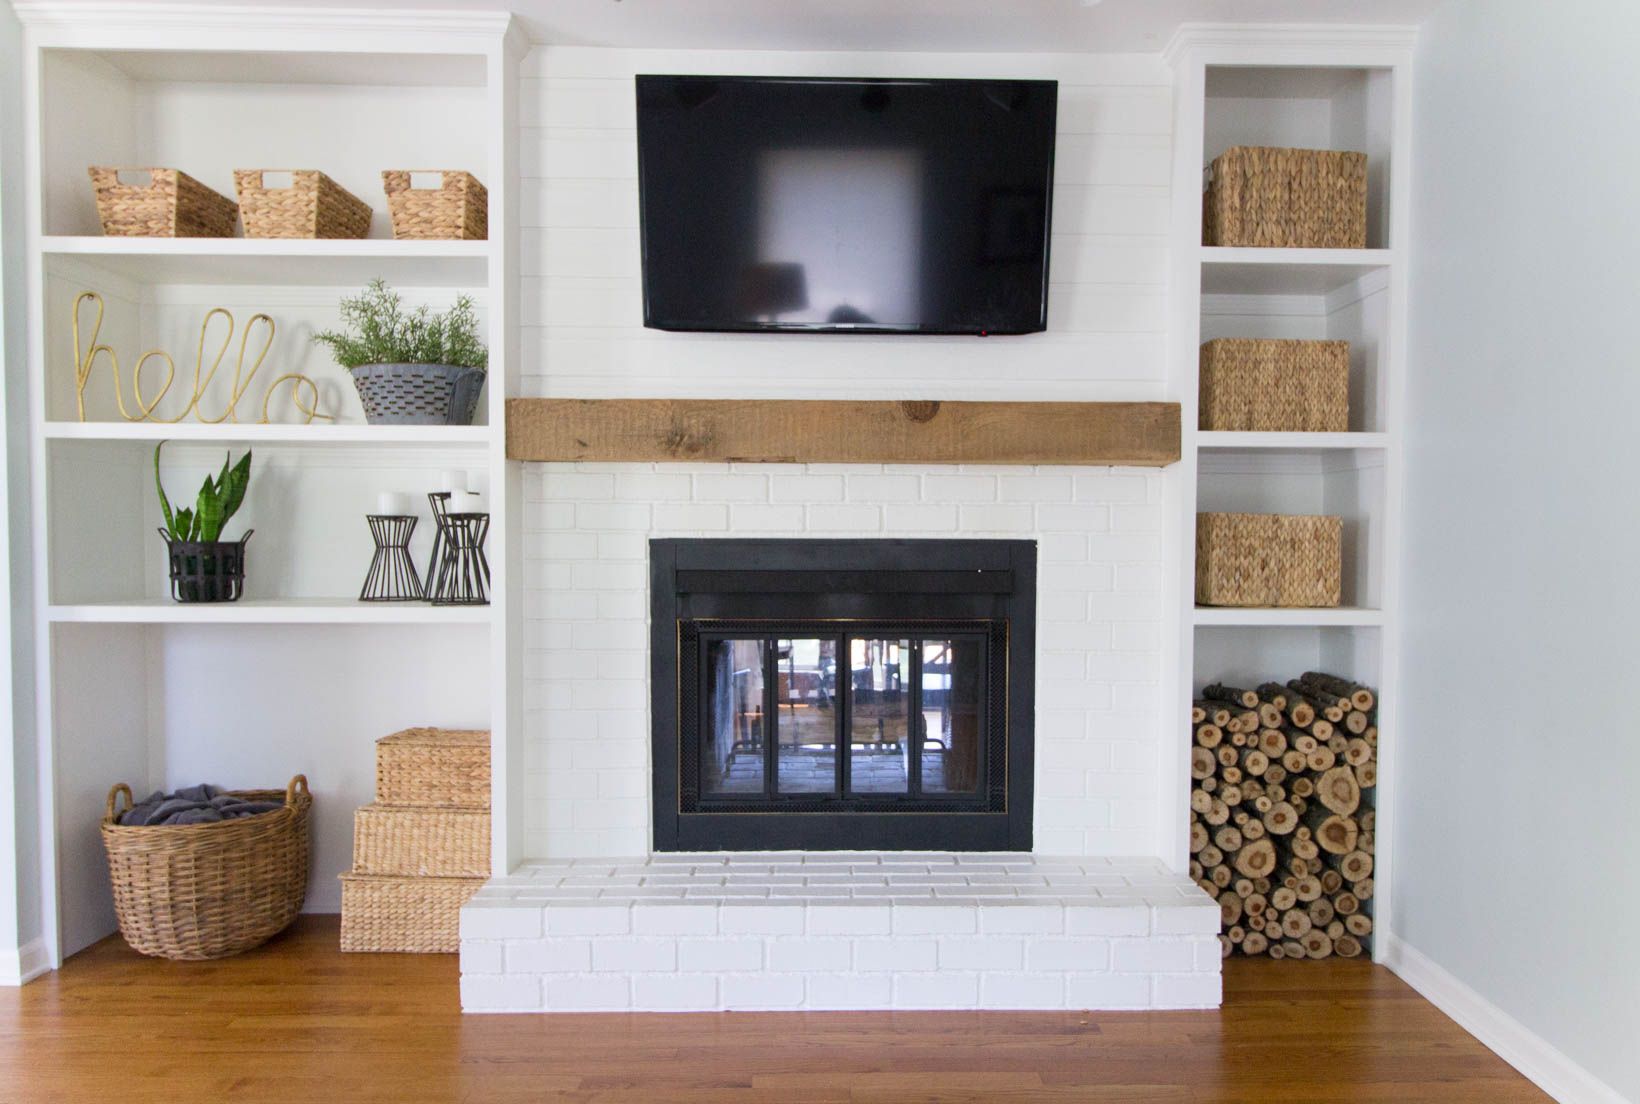 Brick Wall Fireplace Makeover Luxury Built In Shelves Around Shallow Depth Brick Fireplace